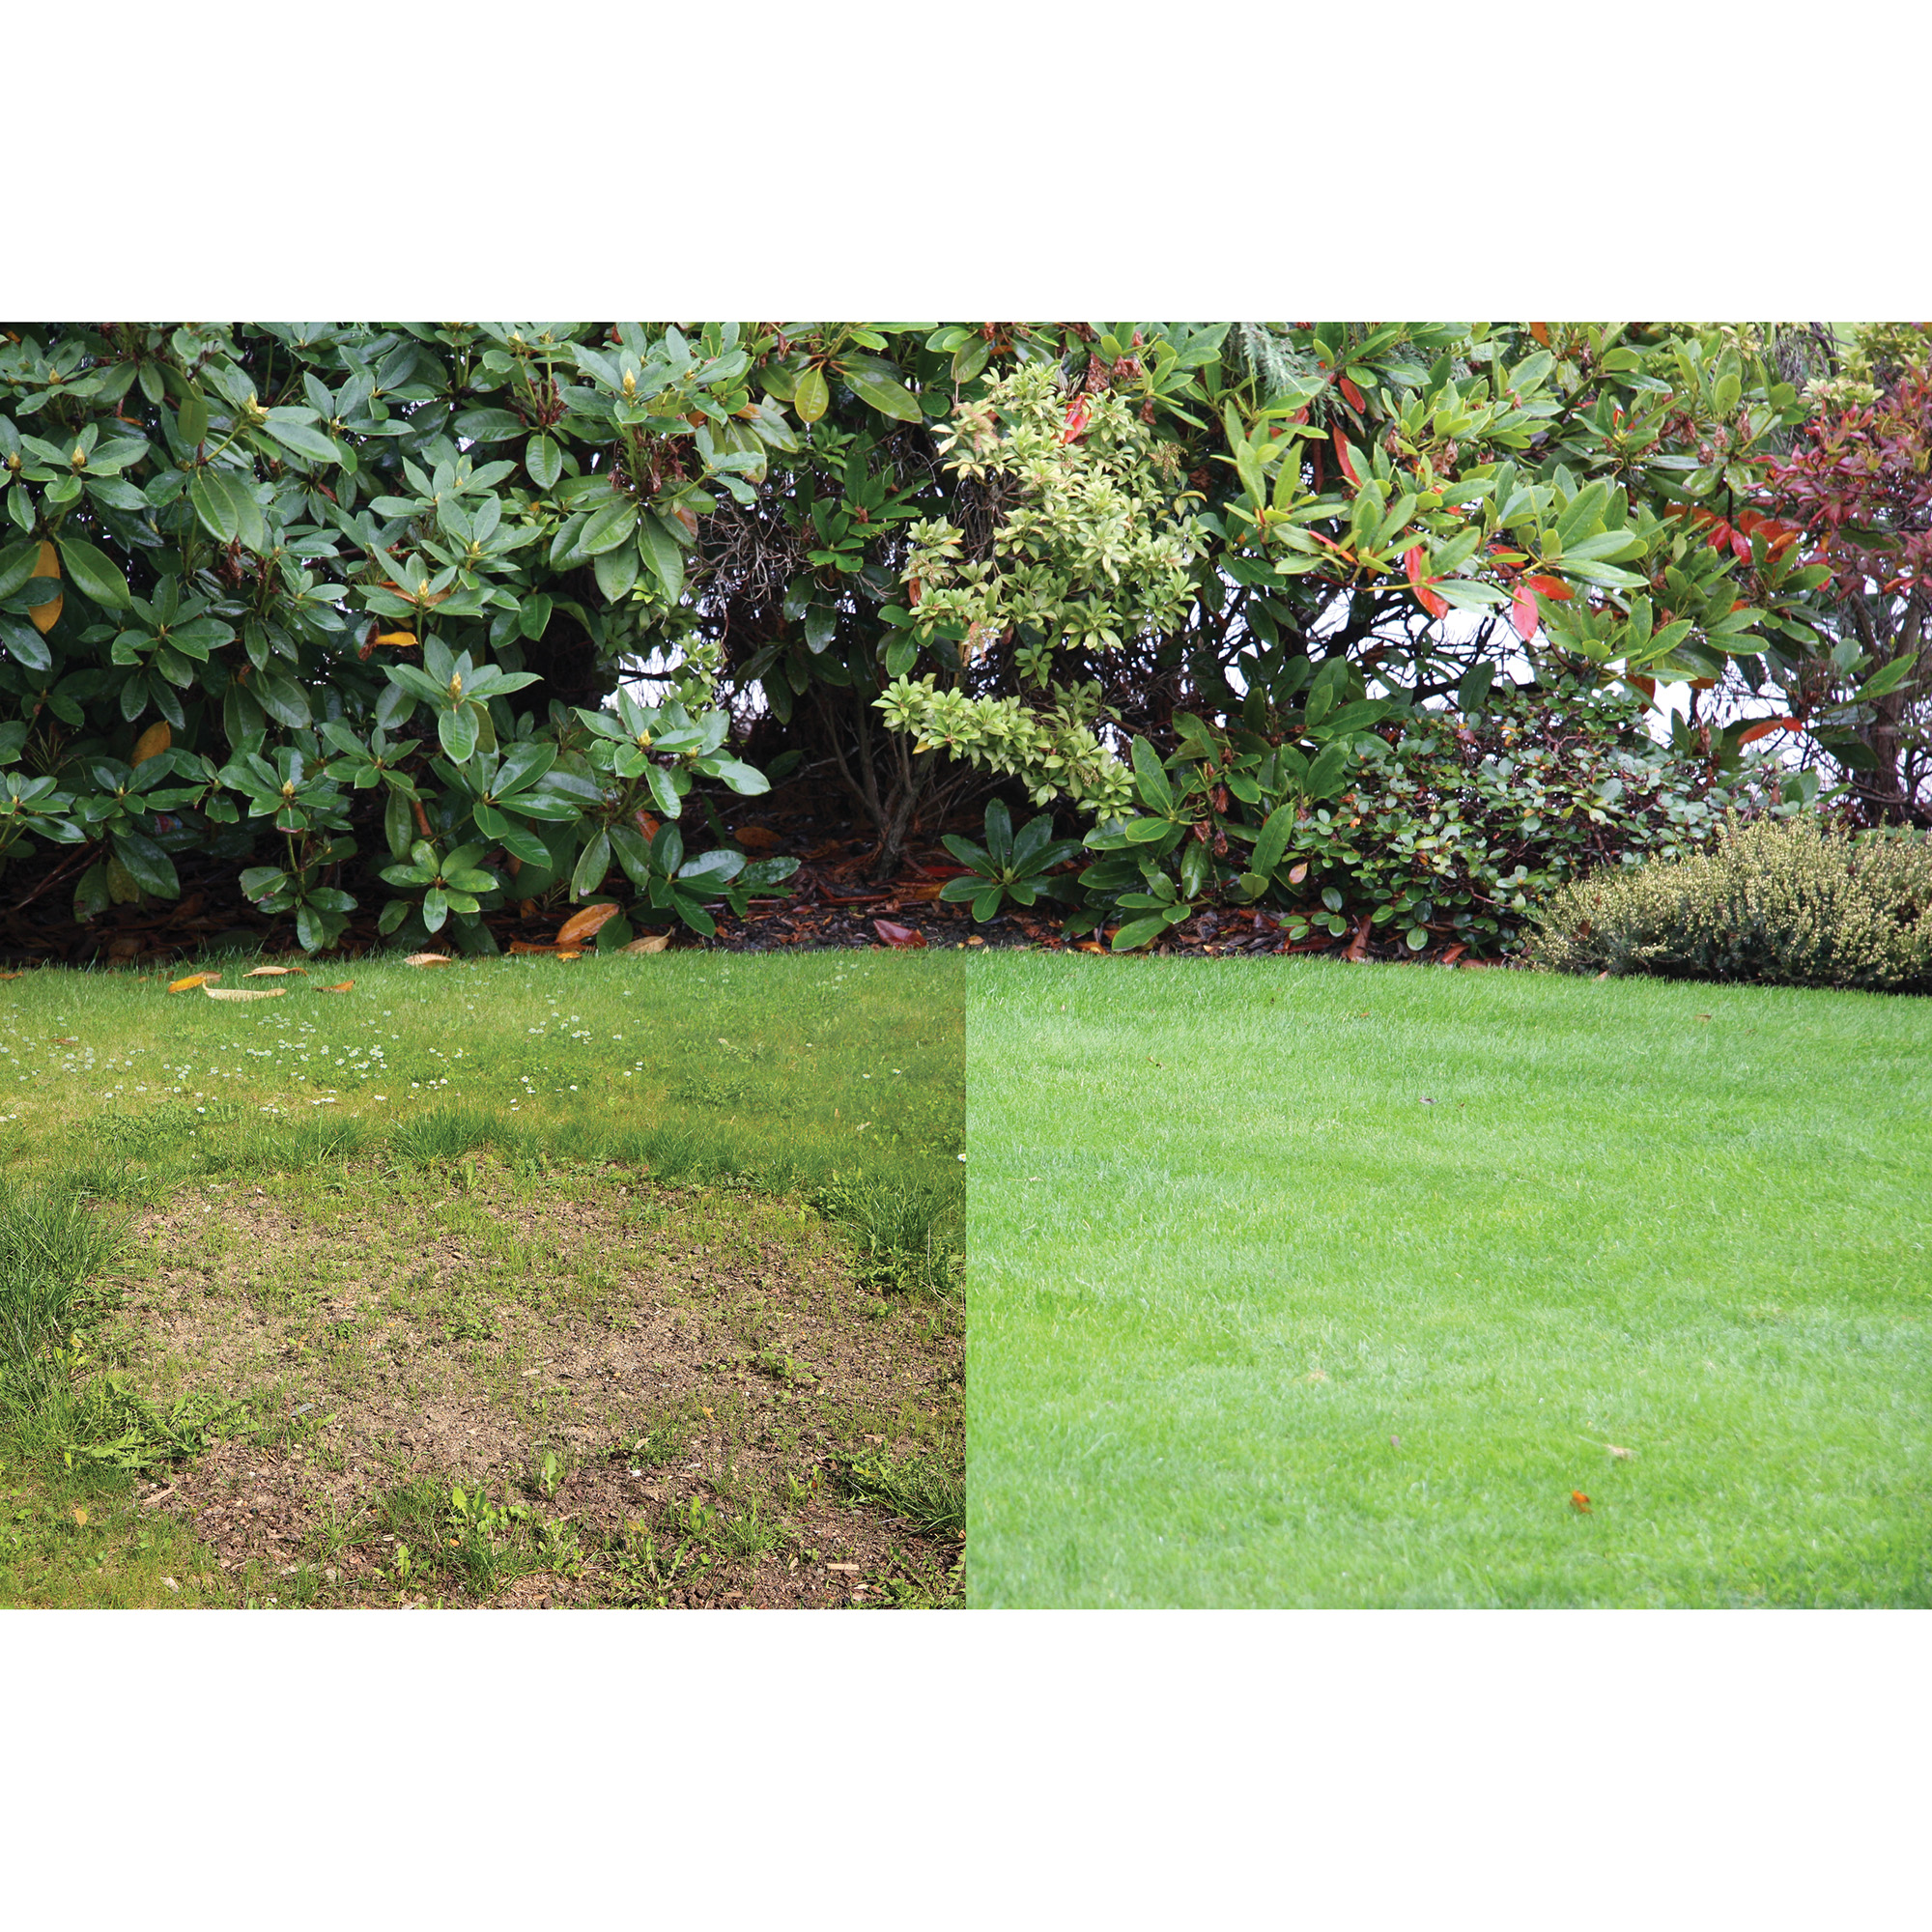 Before and after using Canada Green Grass Seed